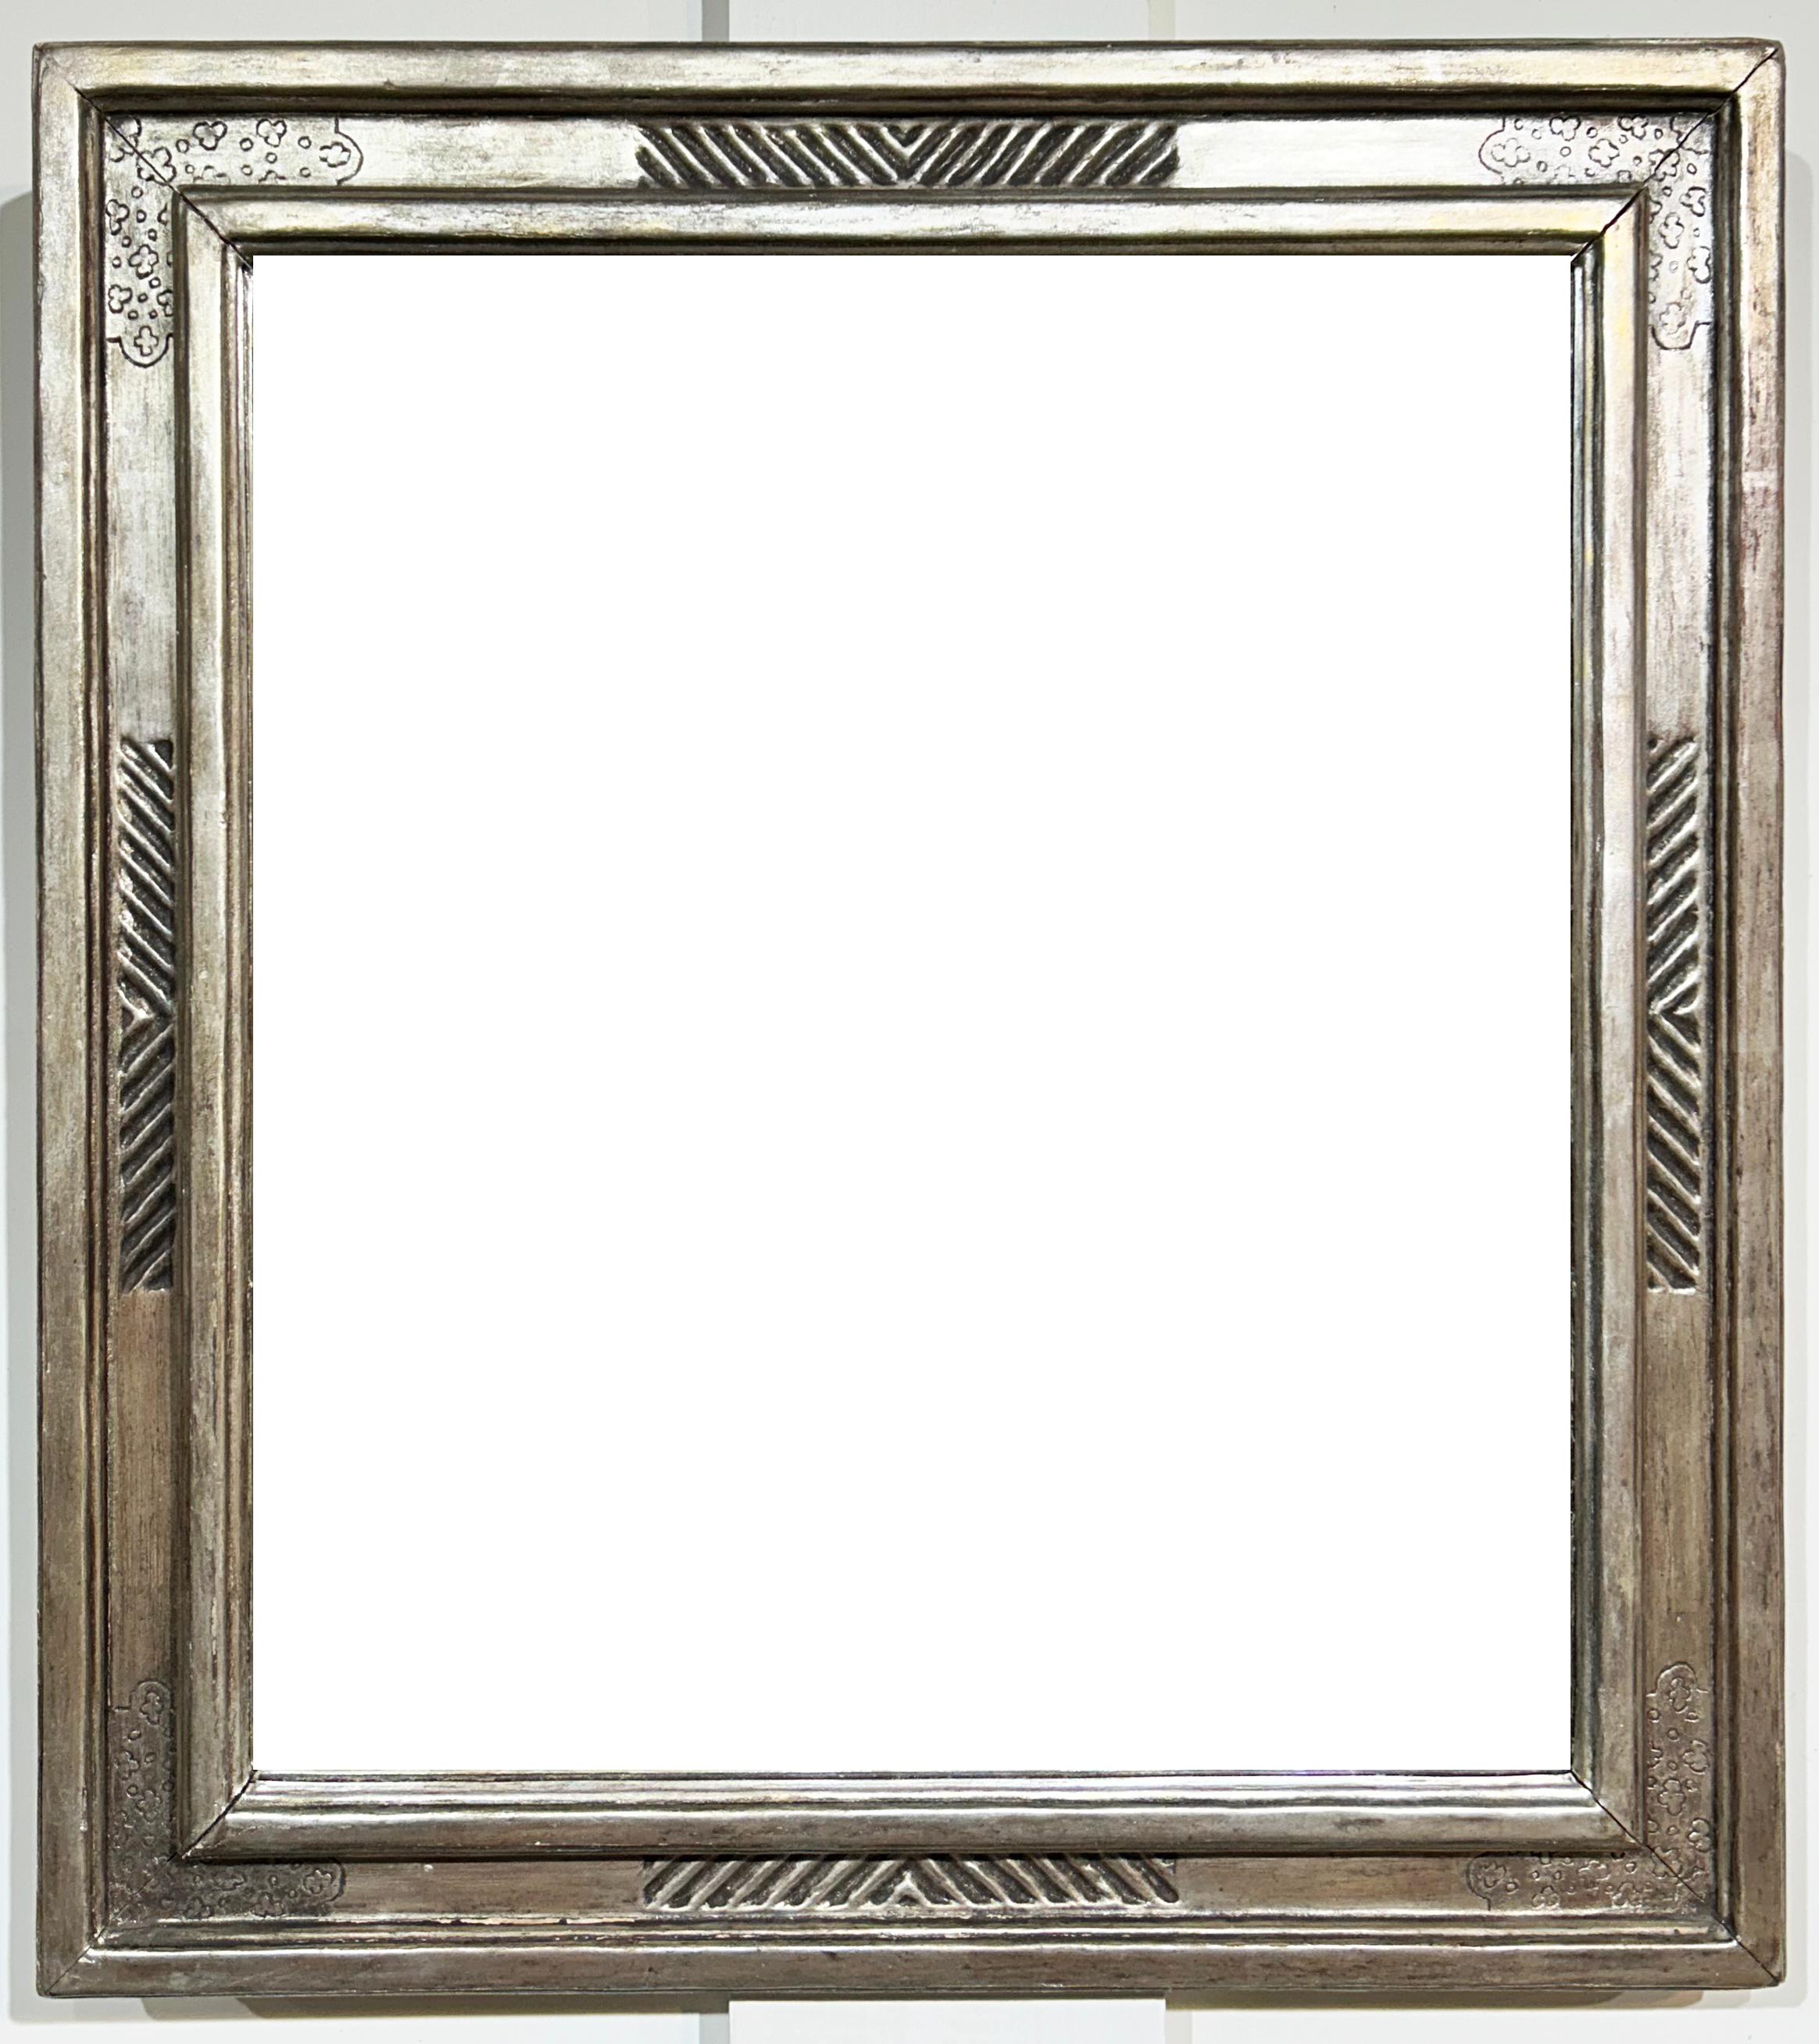 Original Handcrafted Wood Frame with Mirror by Pennsylvania Impressionist 